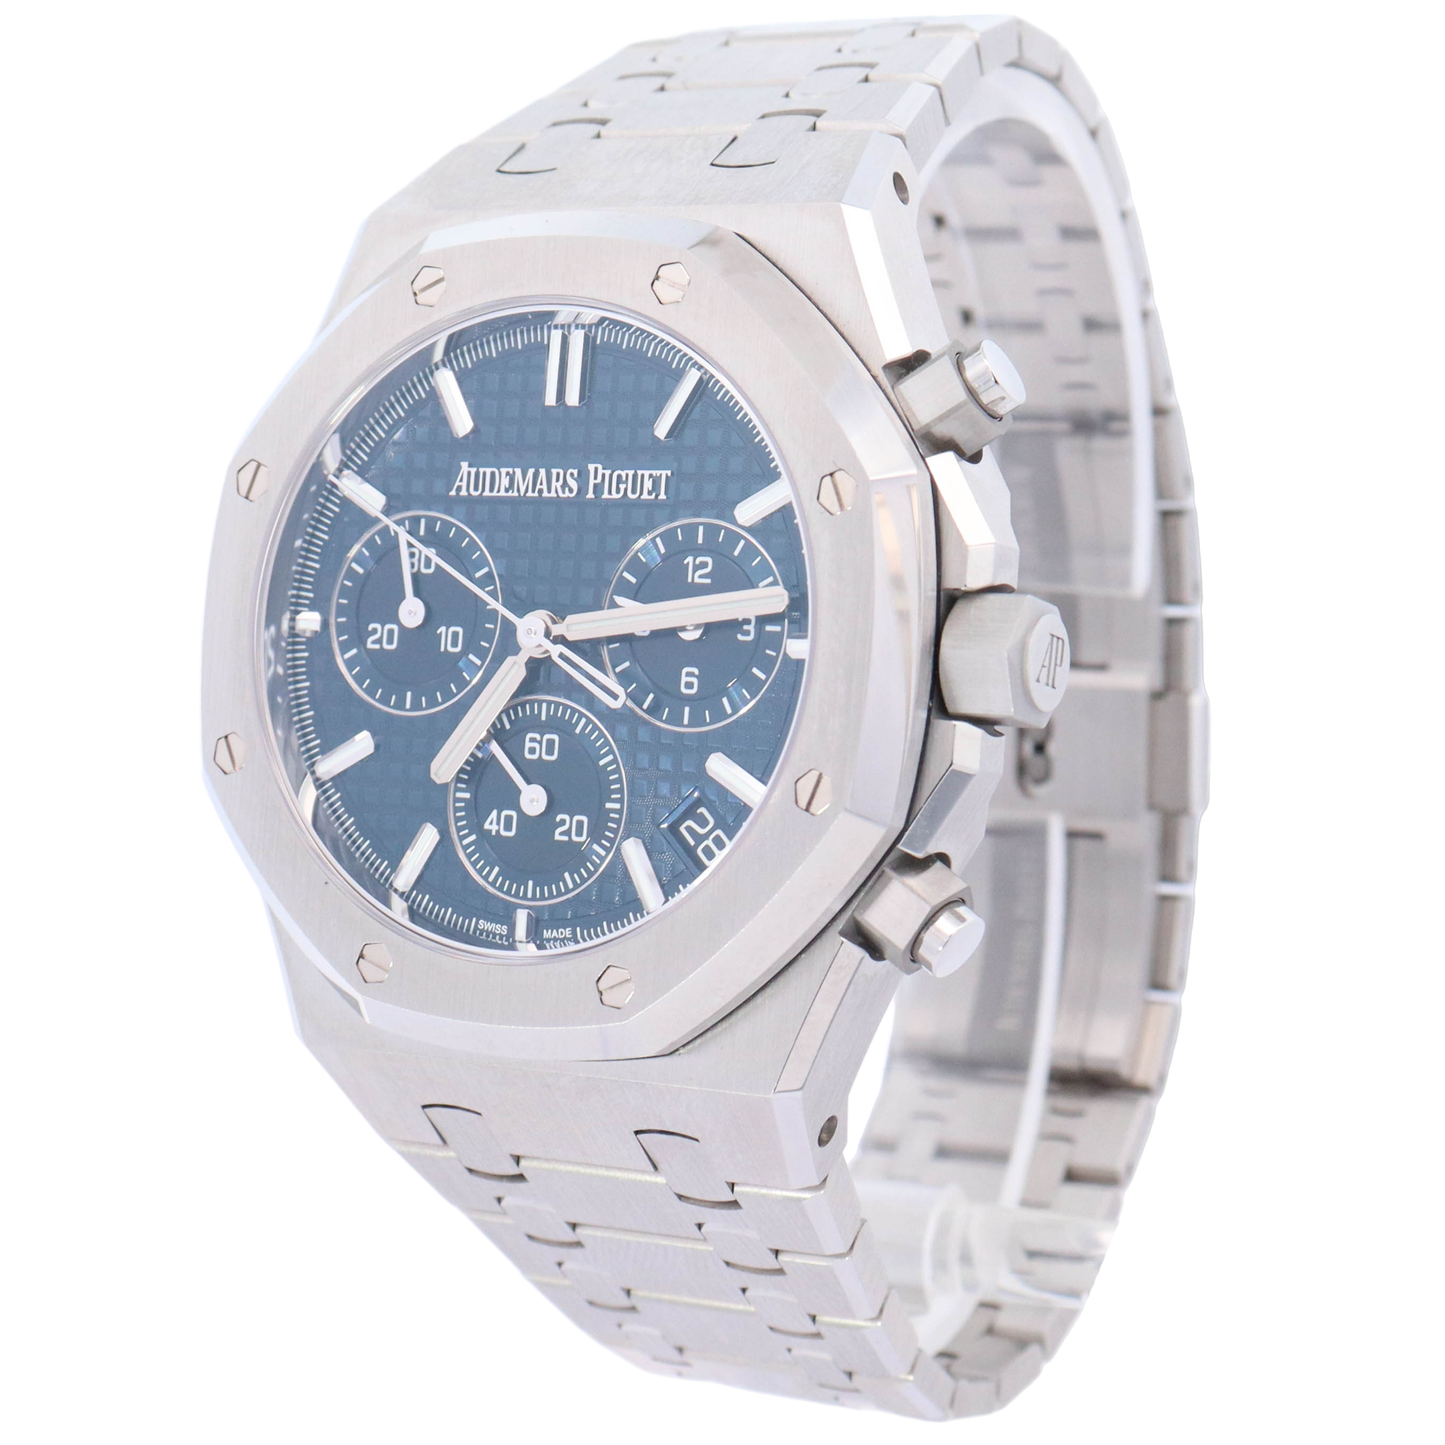 Audemars Piguet Royal Oak "50th Anniversary" 41mm Stainless Steel Blue Chronograph Dial Watch# 26240ST.OO.1320ST.01 - Happy Jewelers Fine Jewelry Lifetime Warranty